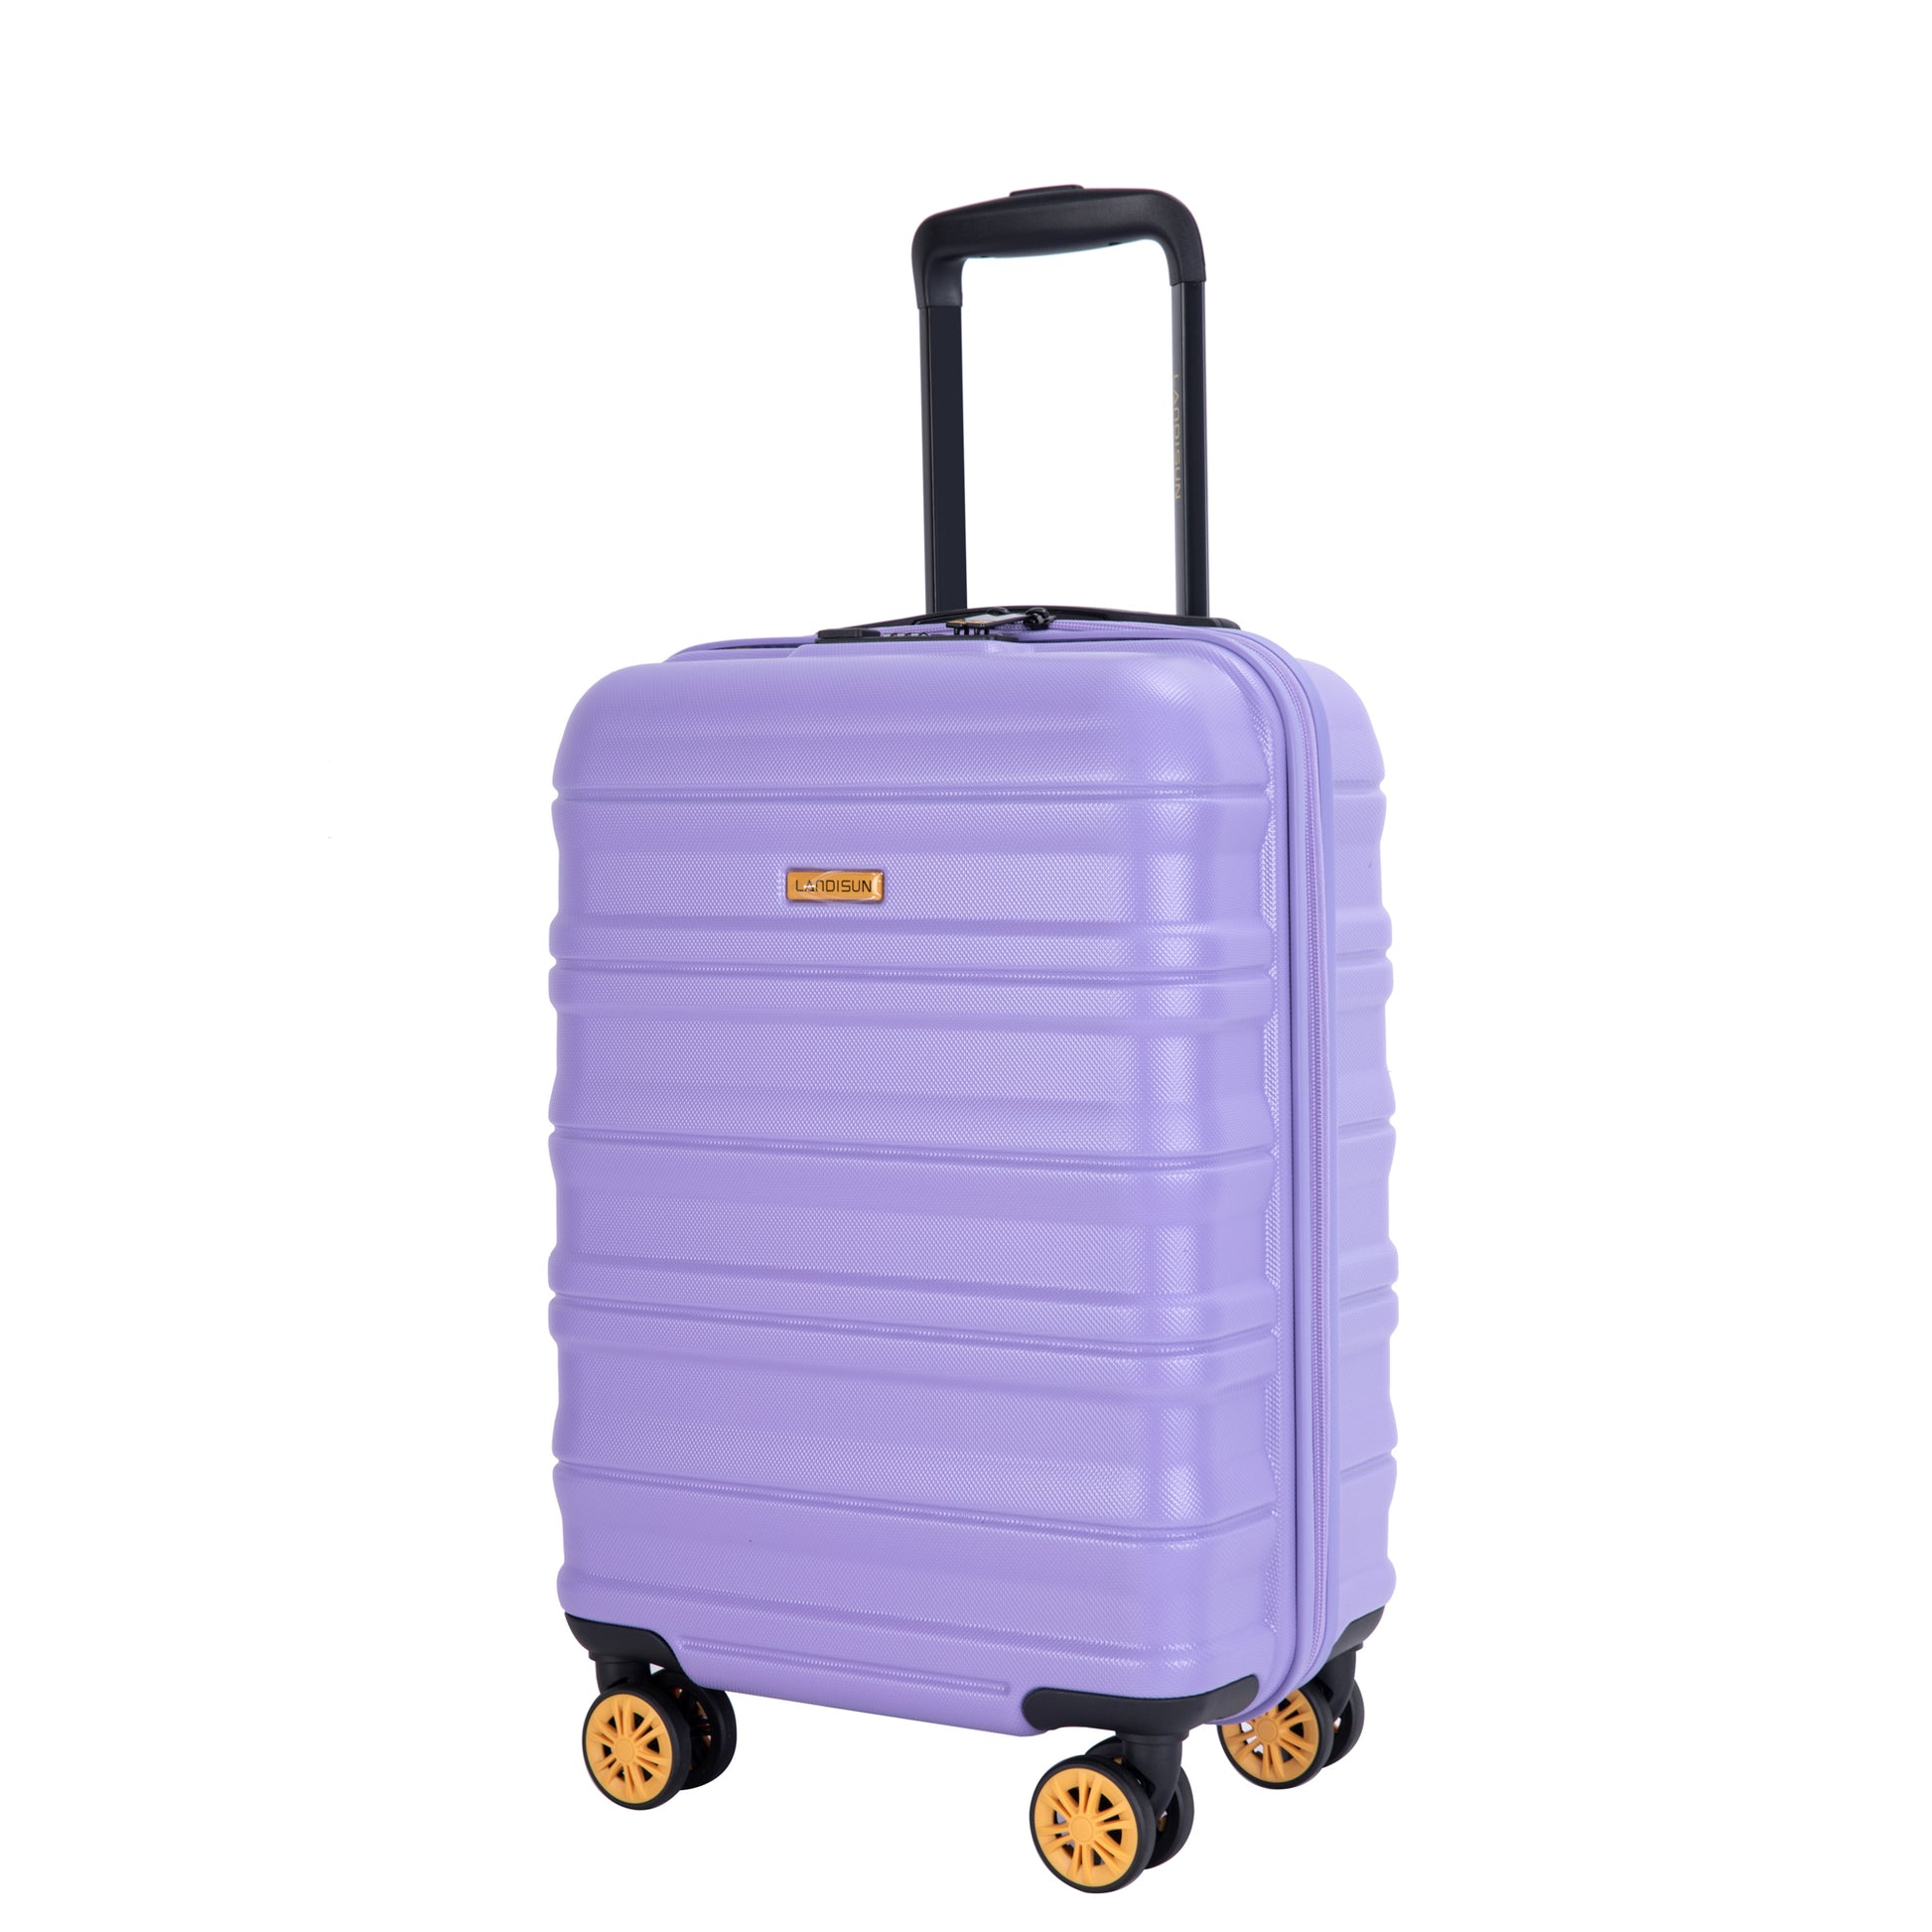 Carry On Luggage Airline Approved18.5" Carry On light purple-abs+pc